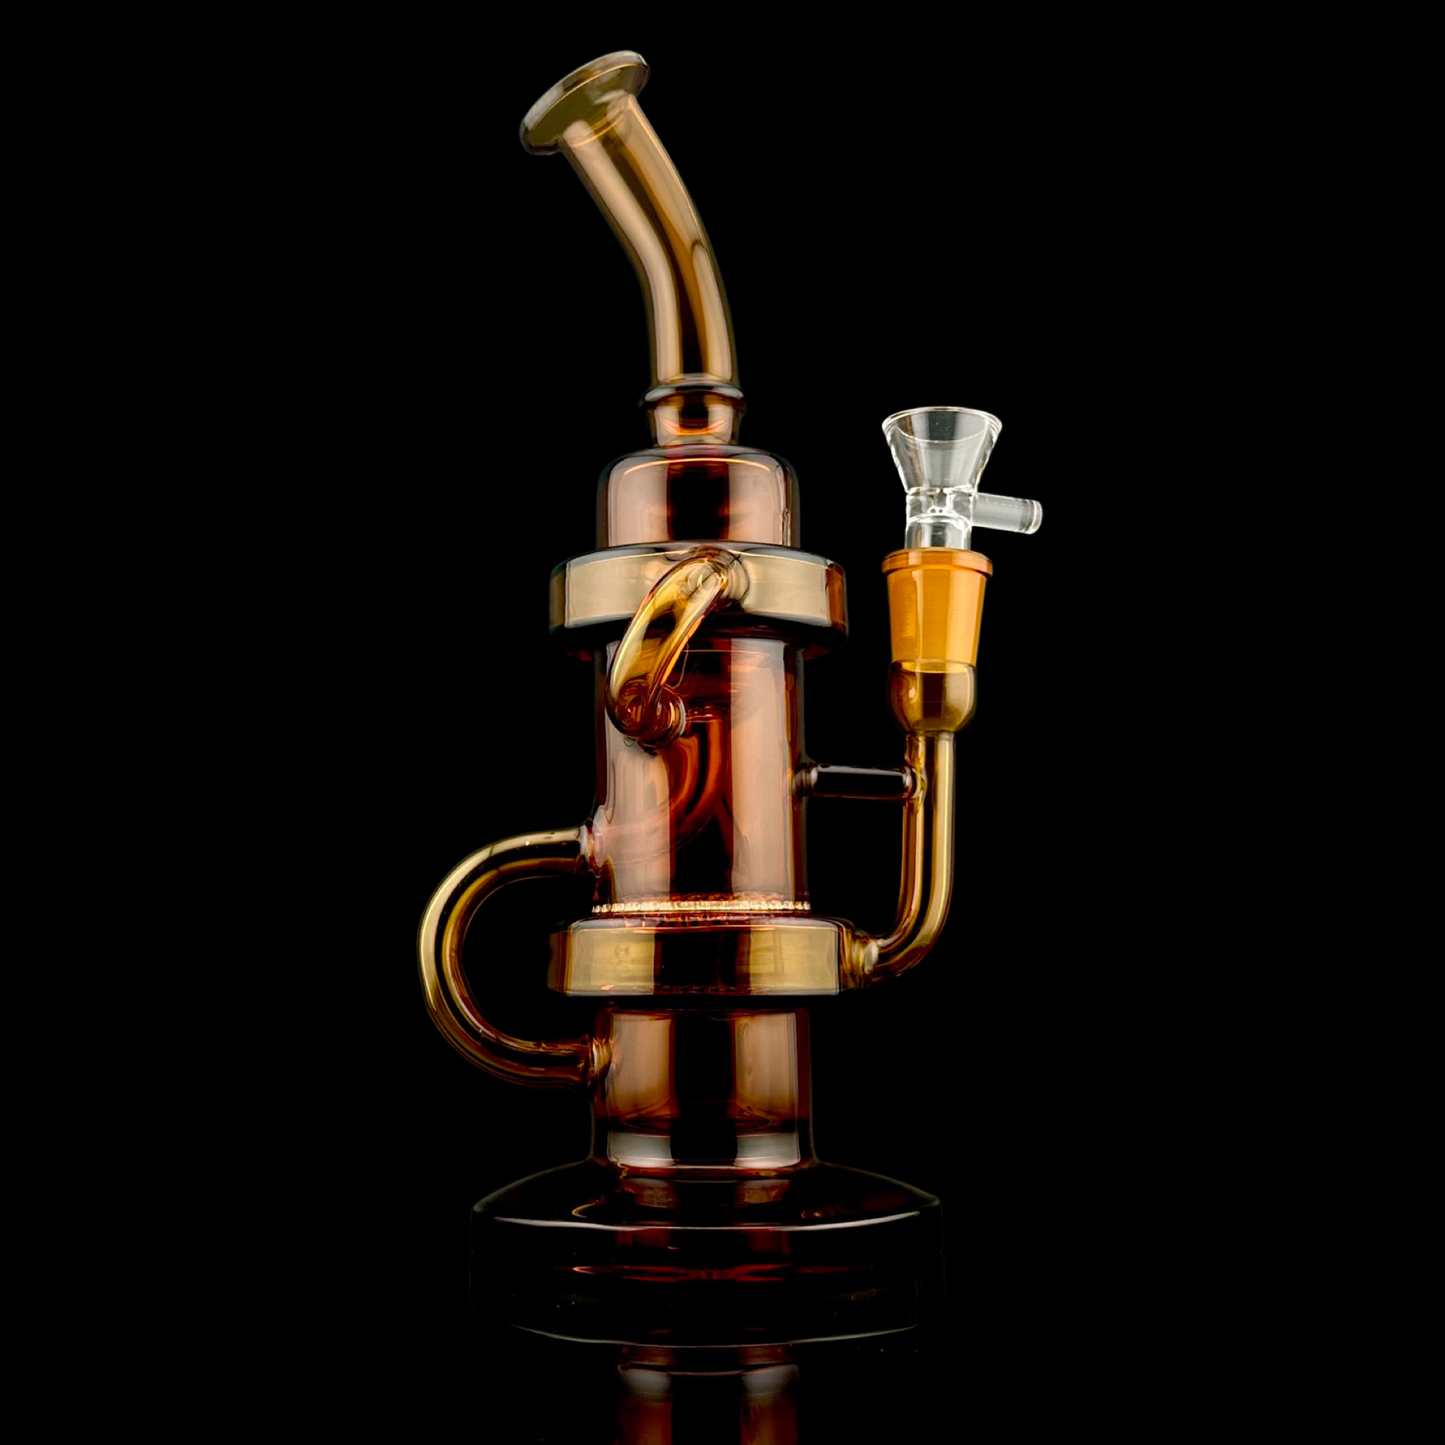 incycler rig